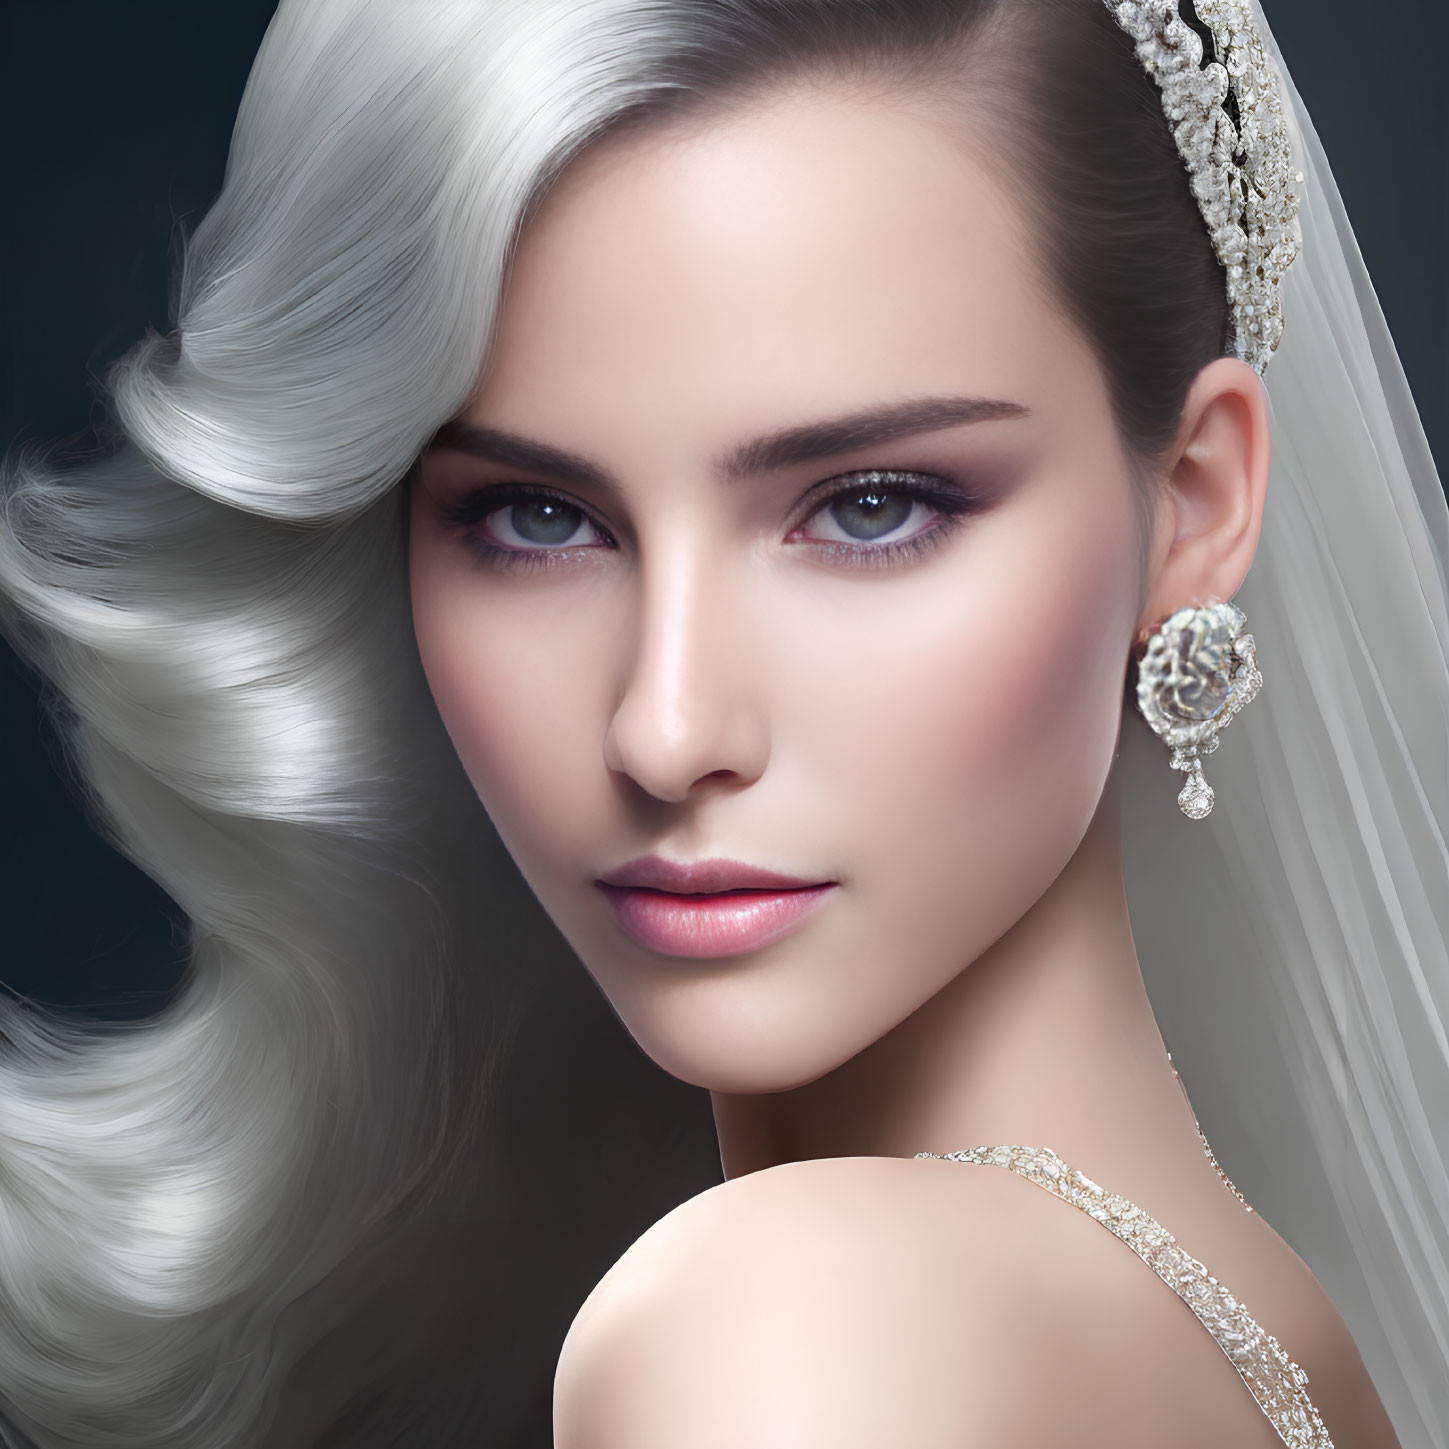 Portrait of woman with flowing white hair, purple eyeshadow, sparkling earring.